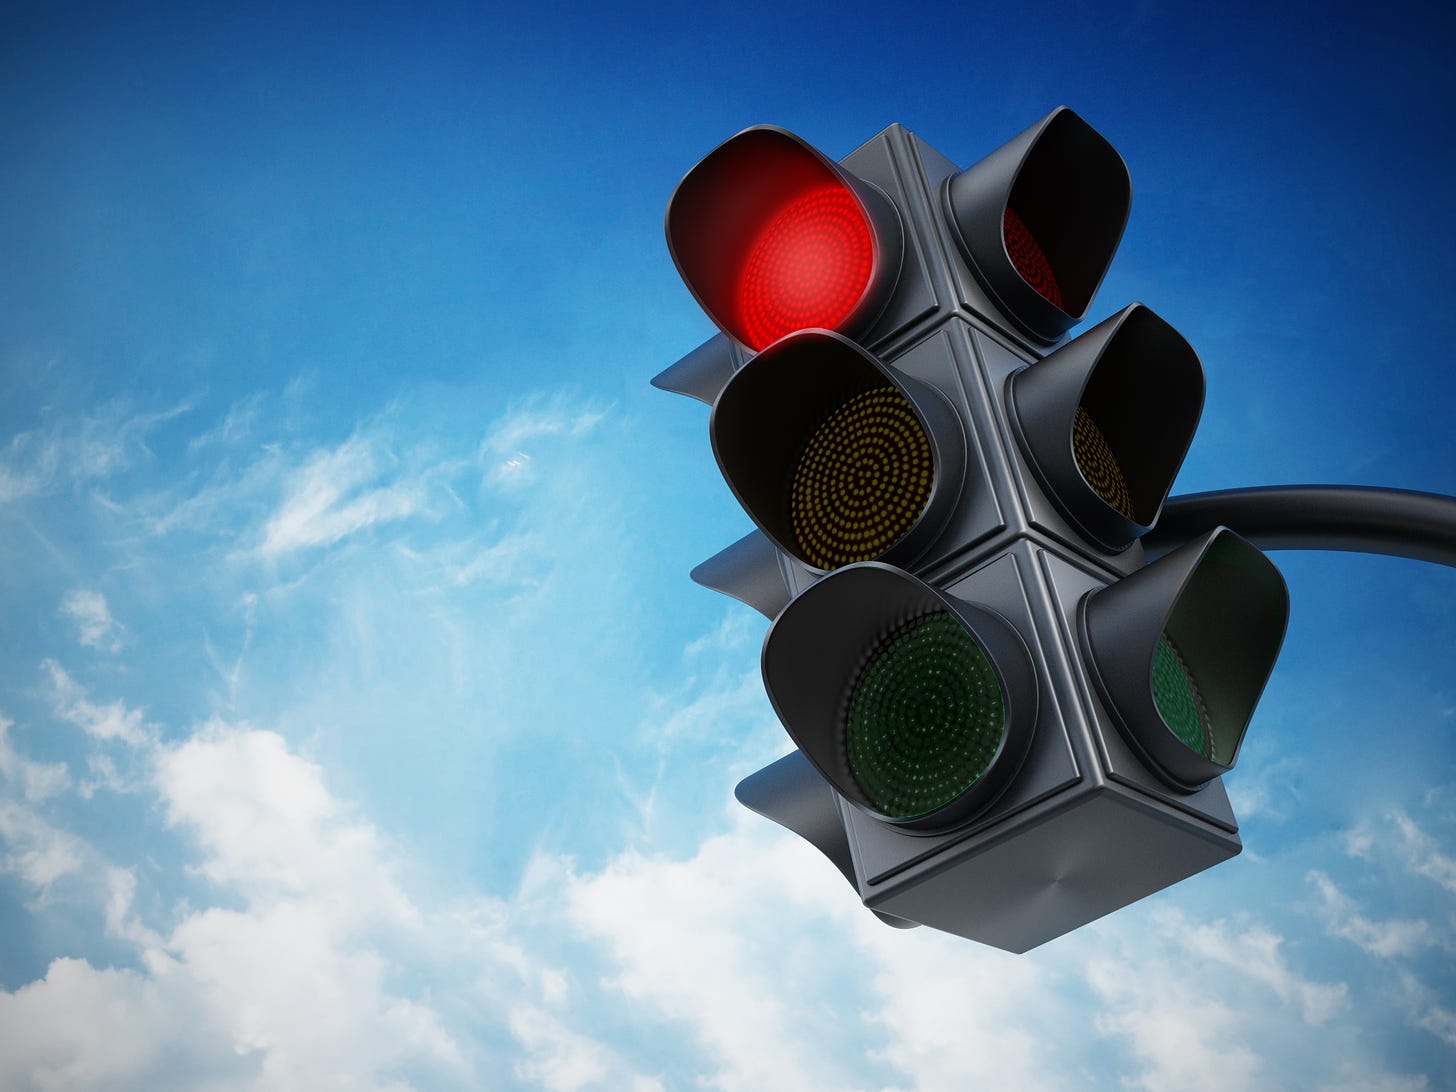 A red traffic light against a blue sky